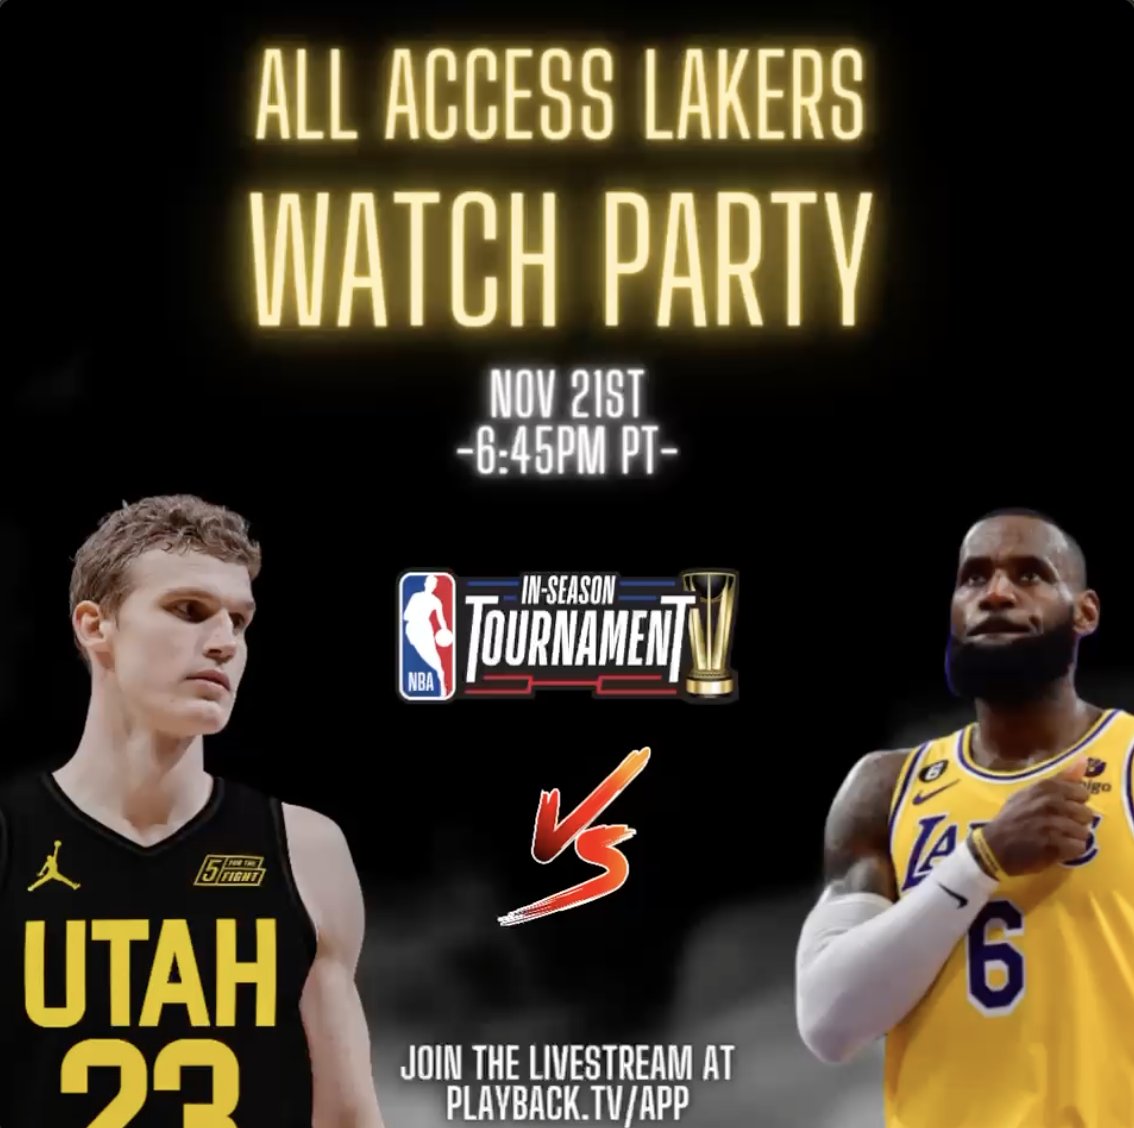 Live #lakeshow watch party for the in season tournament game! Full house tonight. @RajChipalu, @OVOLakeShow @AnthonyIrwinLA @Rome_Beast. Lakers Jazz live on @WatchPlayback PlayBack.TV/AllAccessLakers